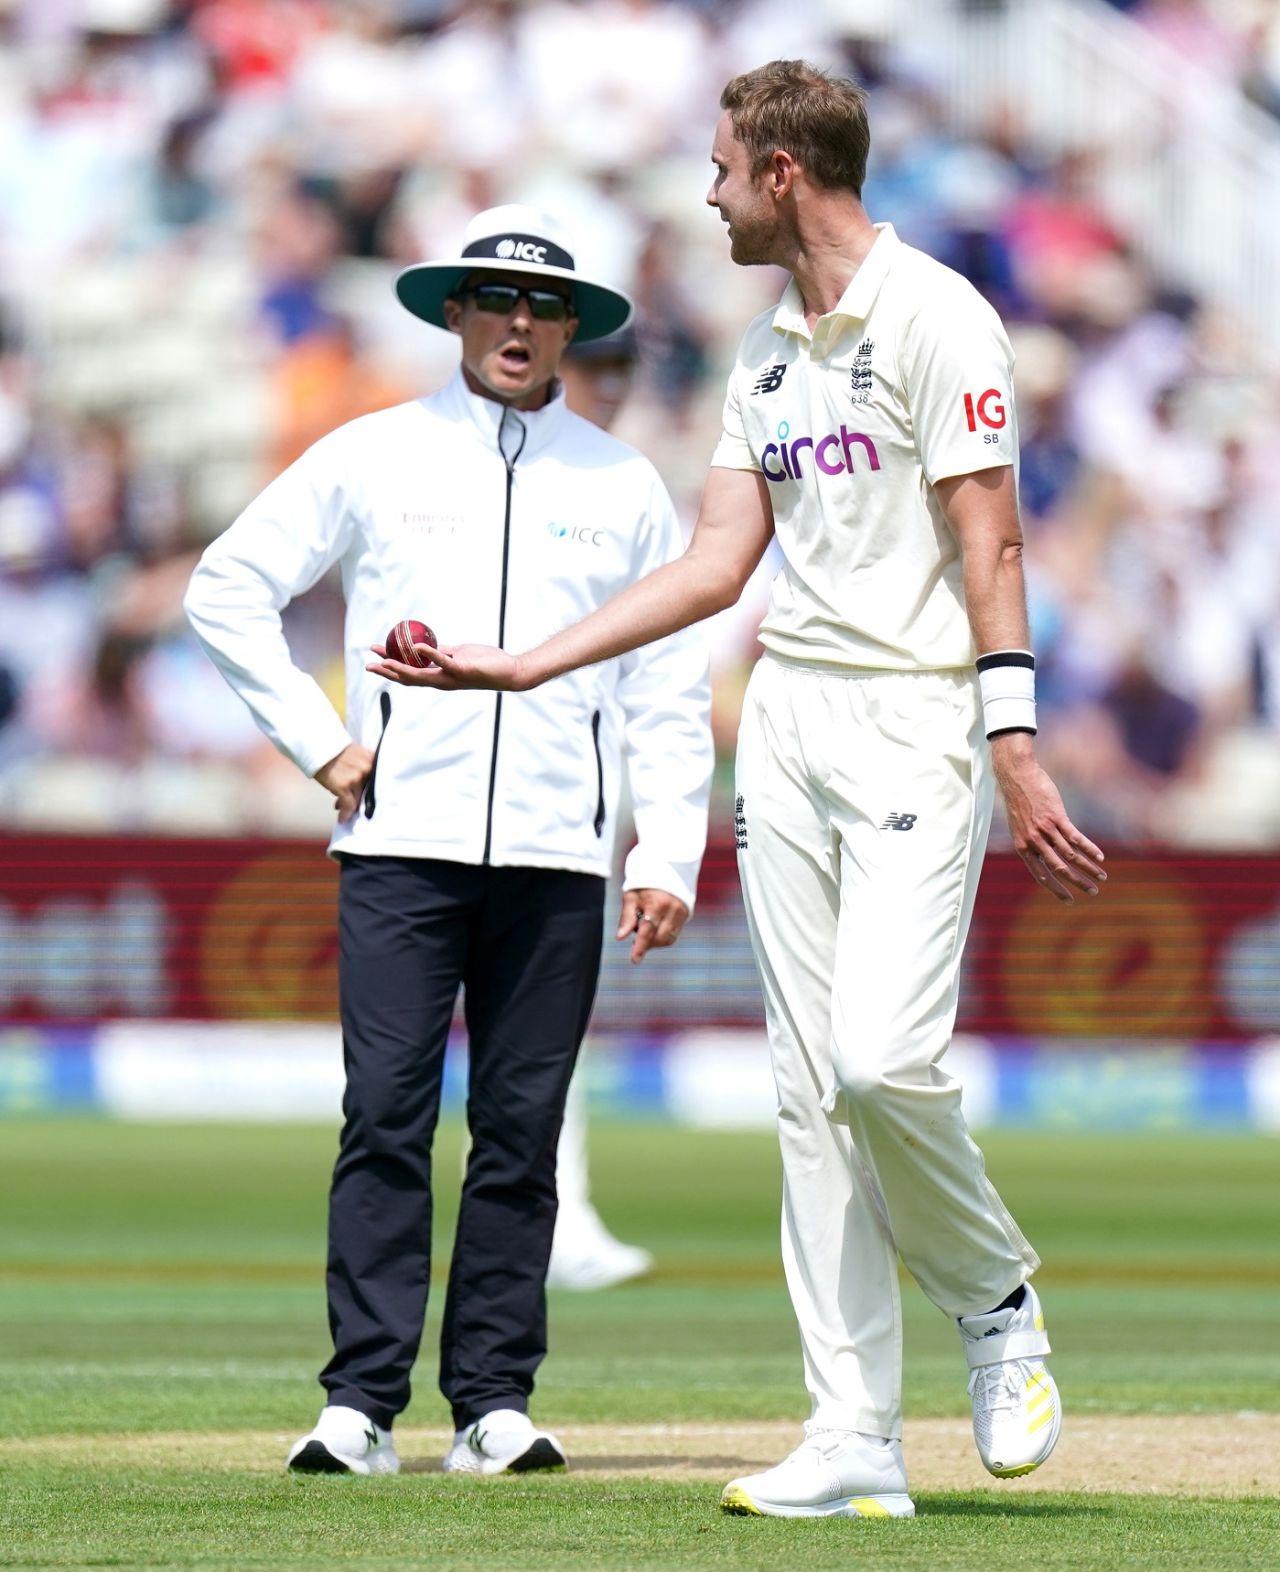 Stuart Broad argues with Richard Kettleborough after Devon Conway was given not out, England vs New Zealand, 2nd Test, Birmingham, 2nd day, June 11, 2021